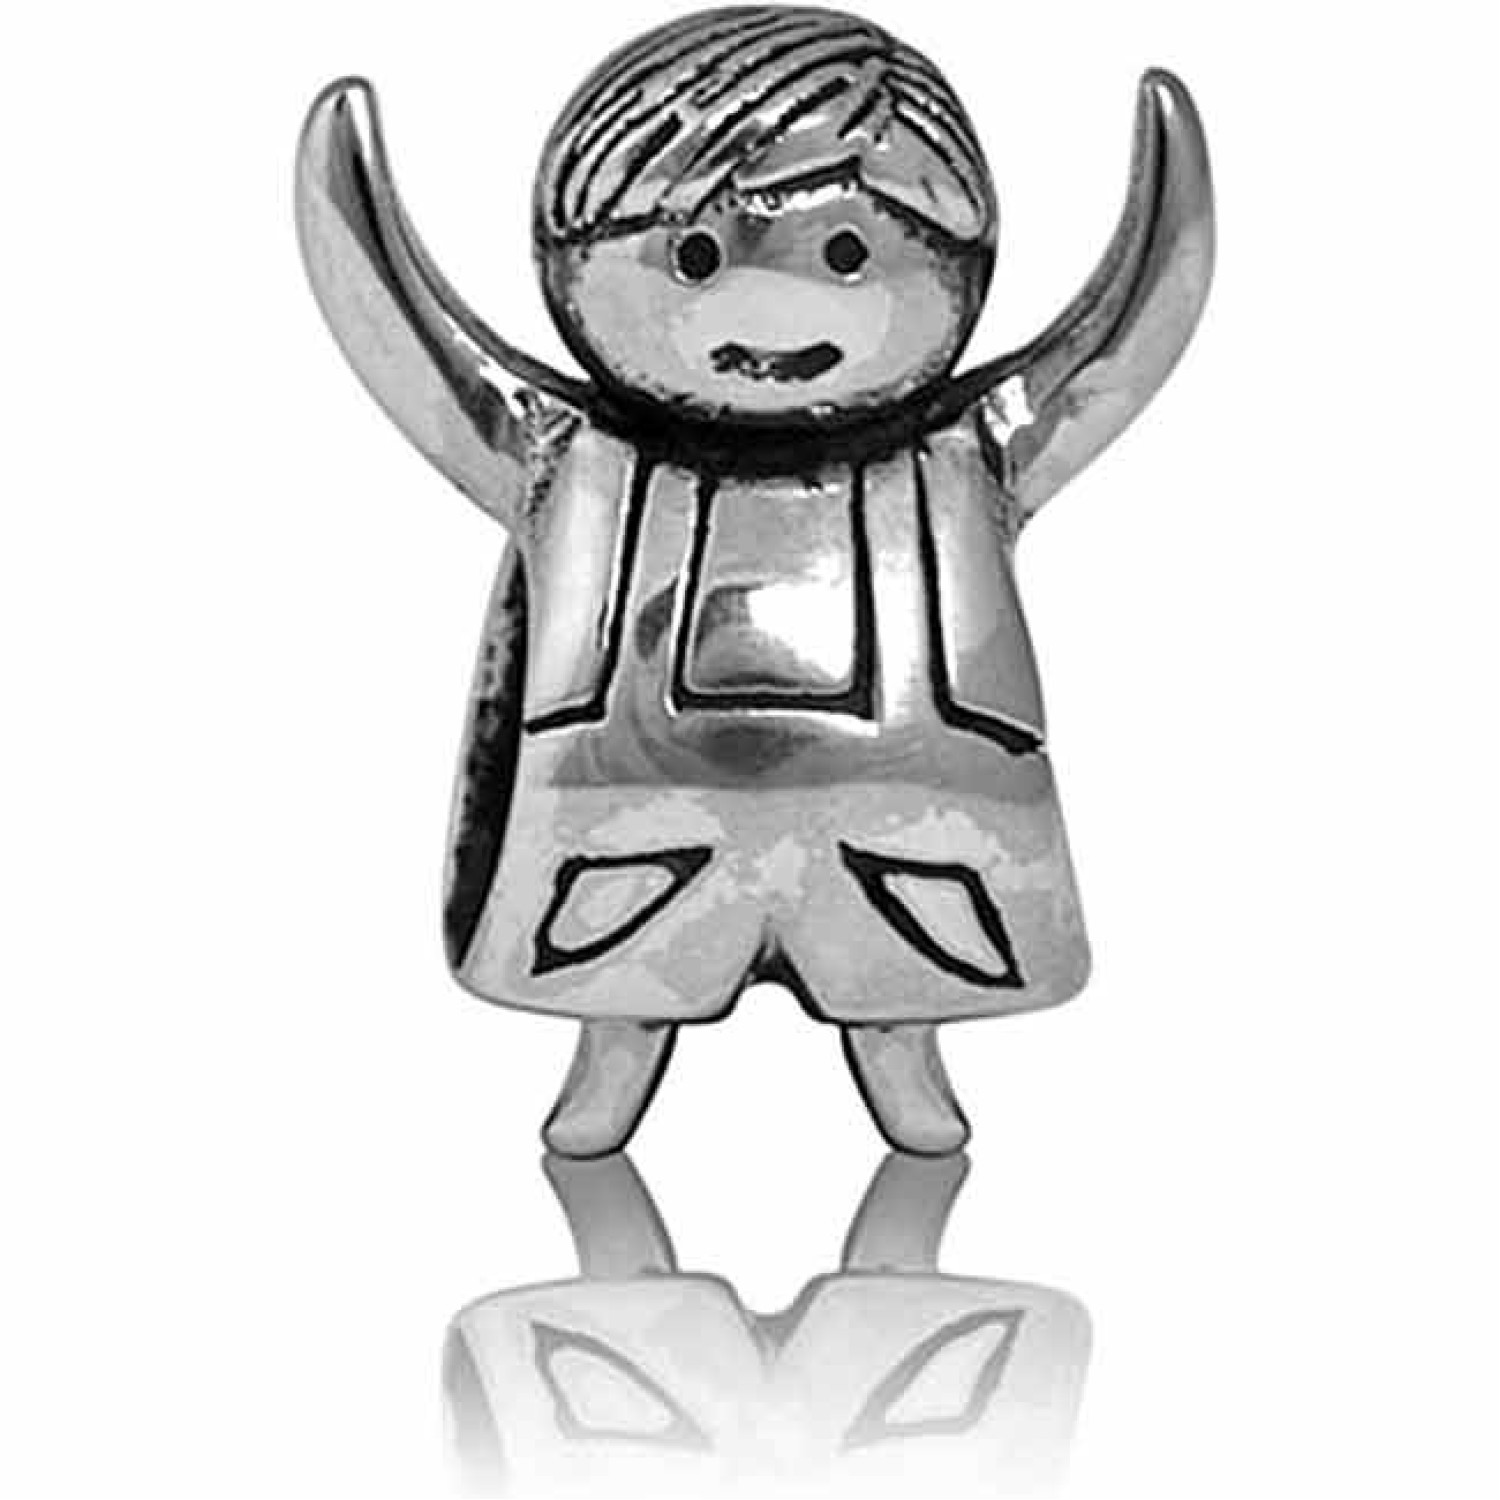 LK139 Evolve NZ Charms Treasured Boy. LK138 Evolve NZ Charms Treasured Boy Our Treasured Boy charm celebrates our adventurous, spirited and often mischievous boys.  Full of cheeky charm, they enrich our lives with laughter, happiness and a dash of troub @